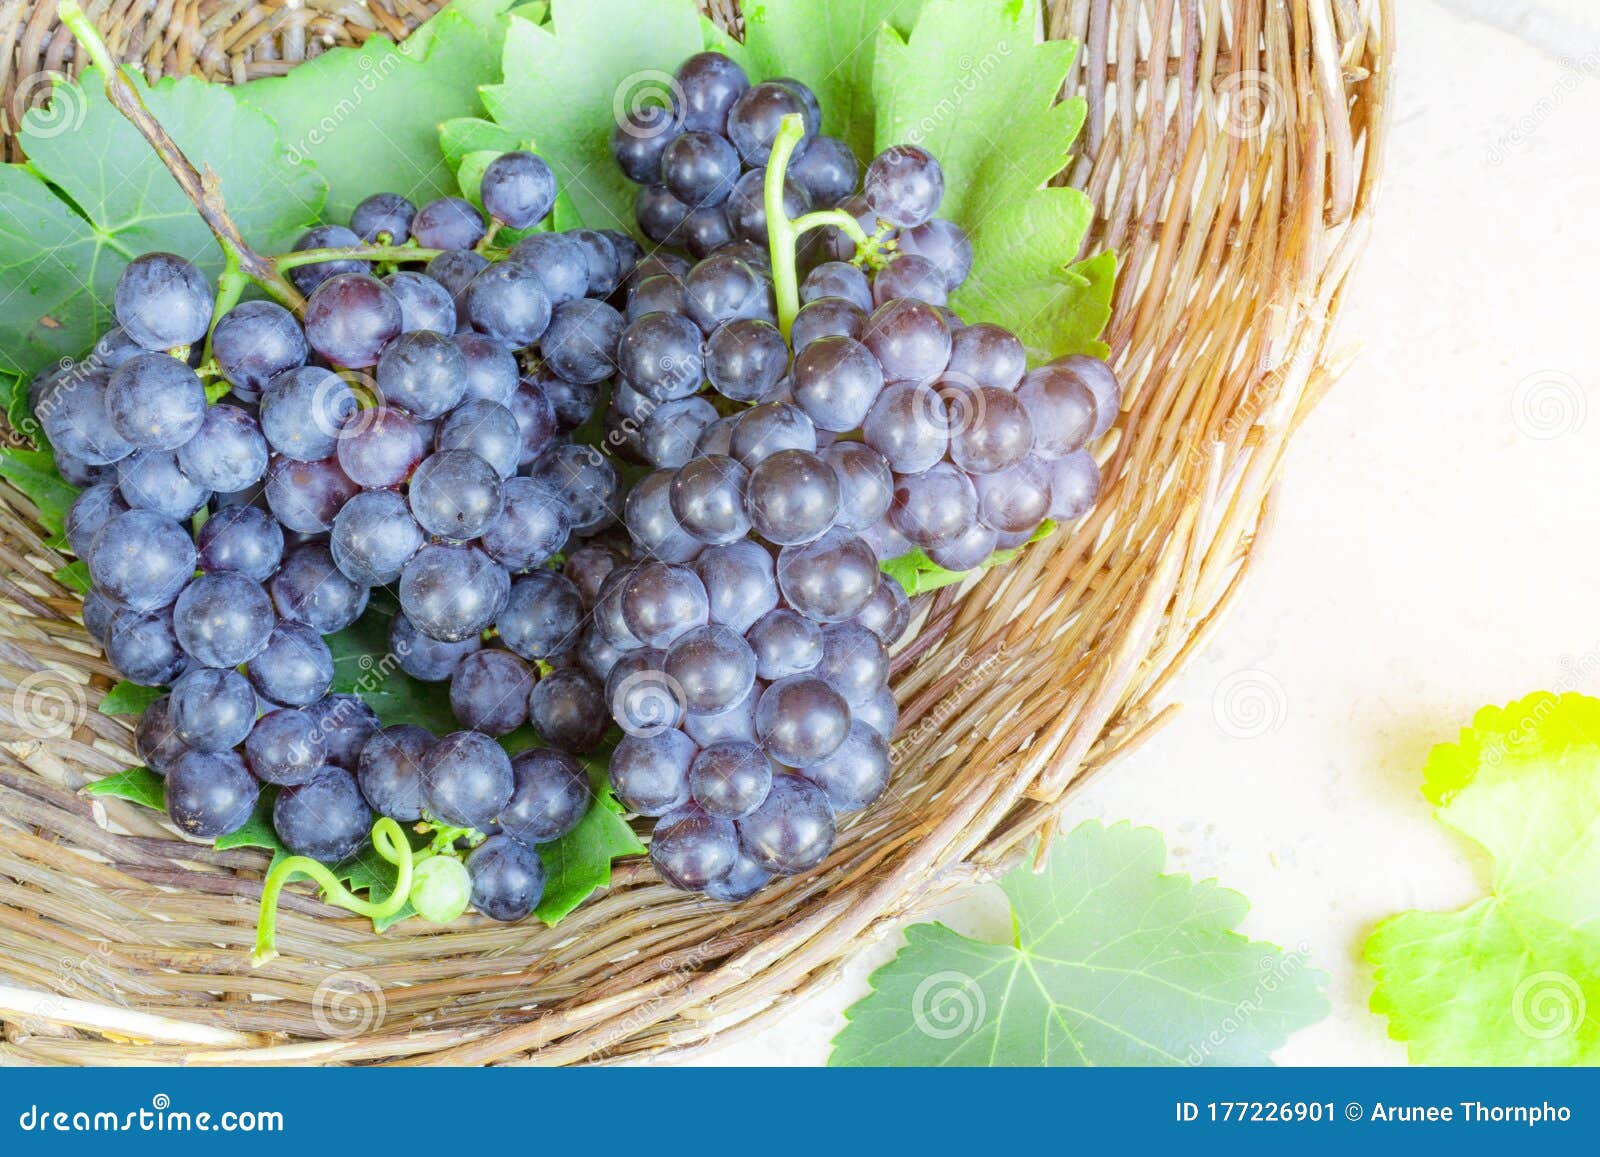 Bunches of Fresh Deep Black Ripe Grape Fruits with Green Leaves in a ...